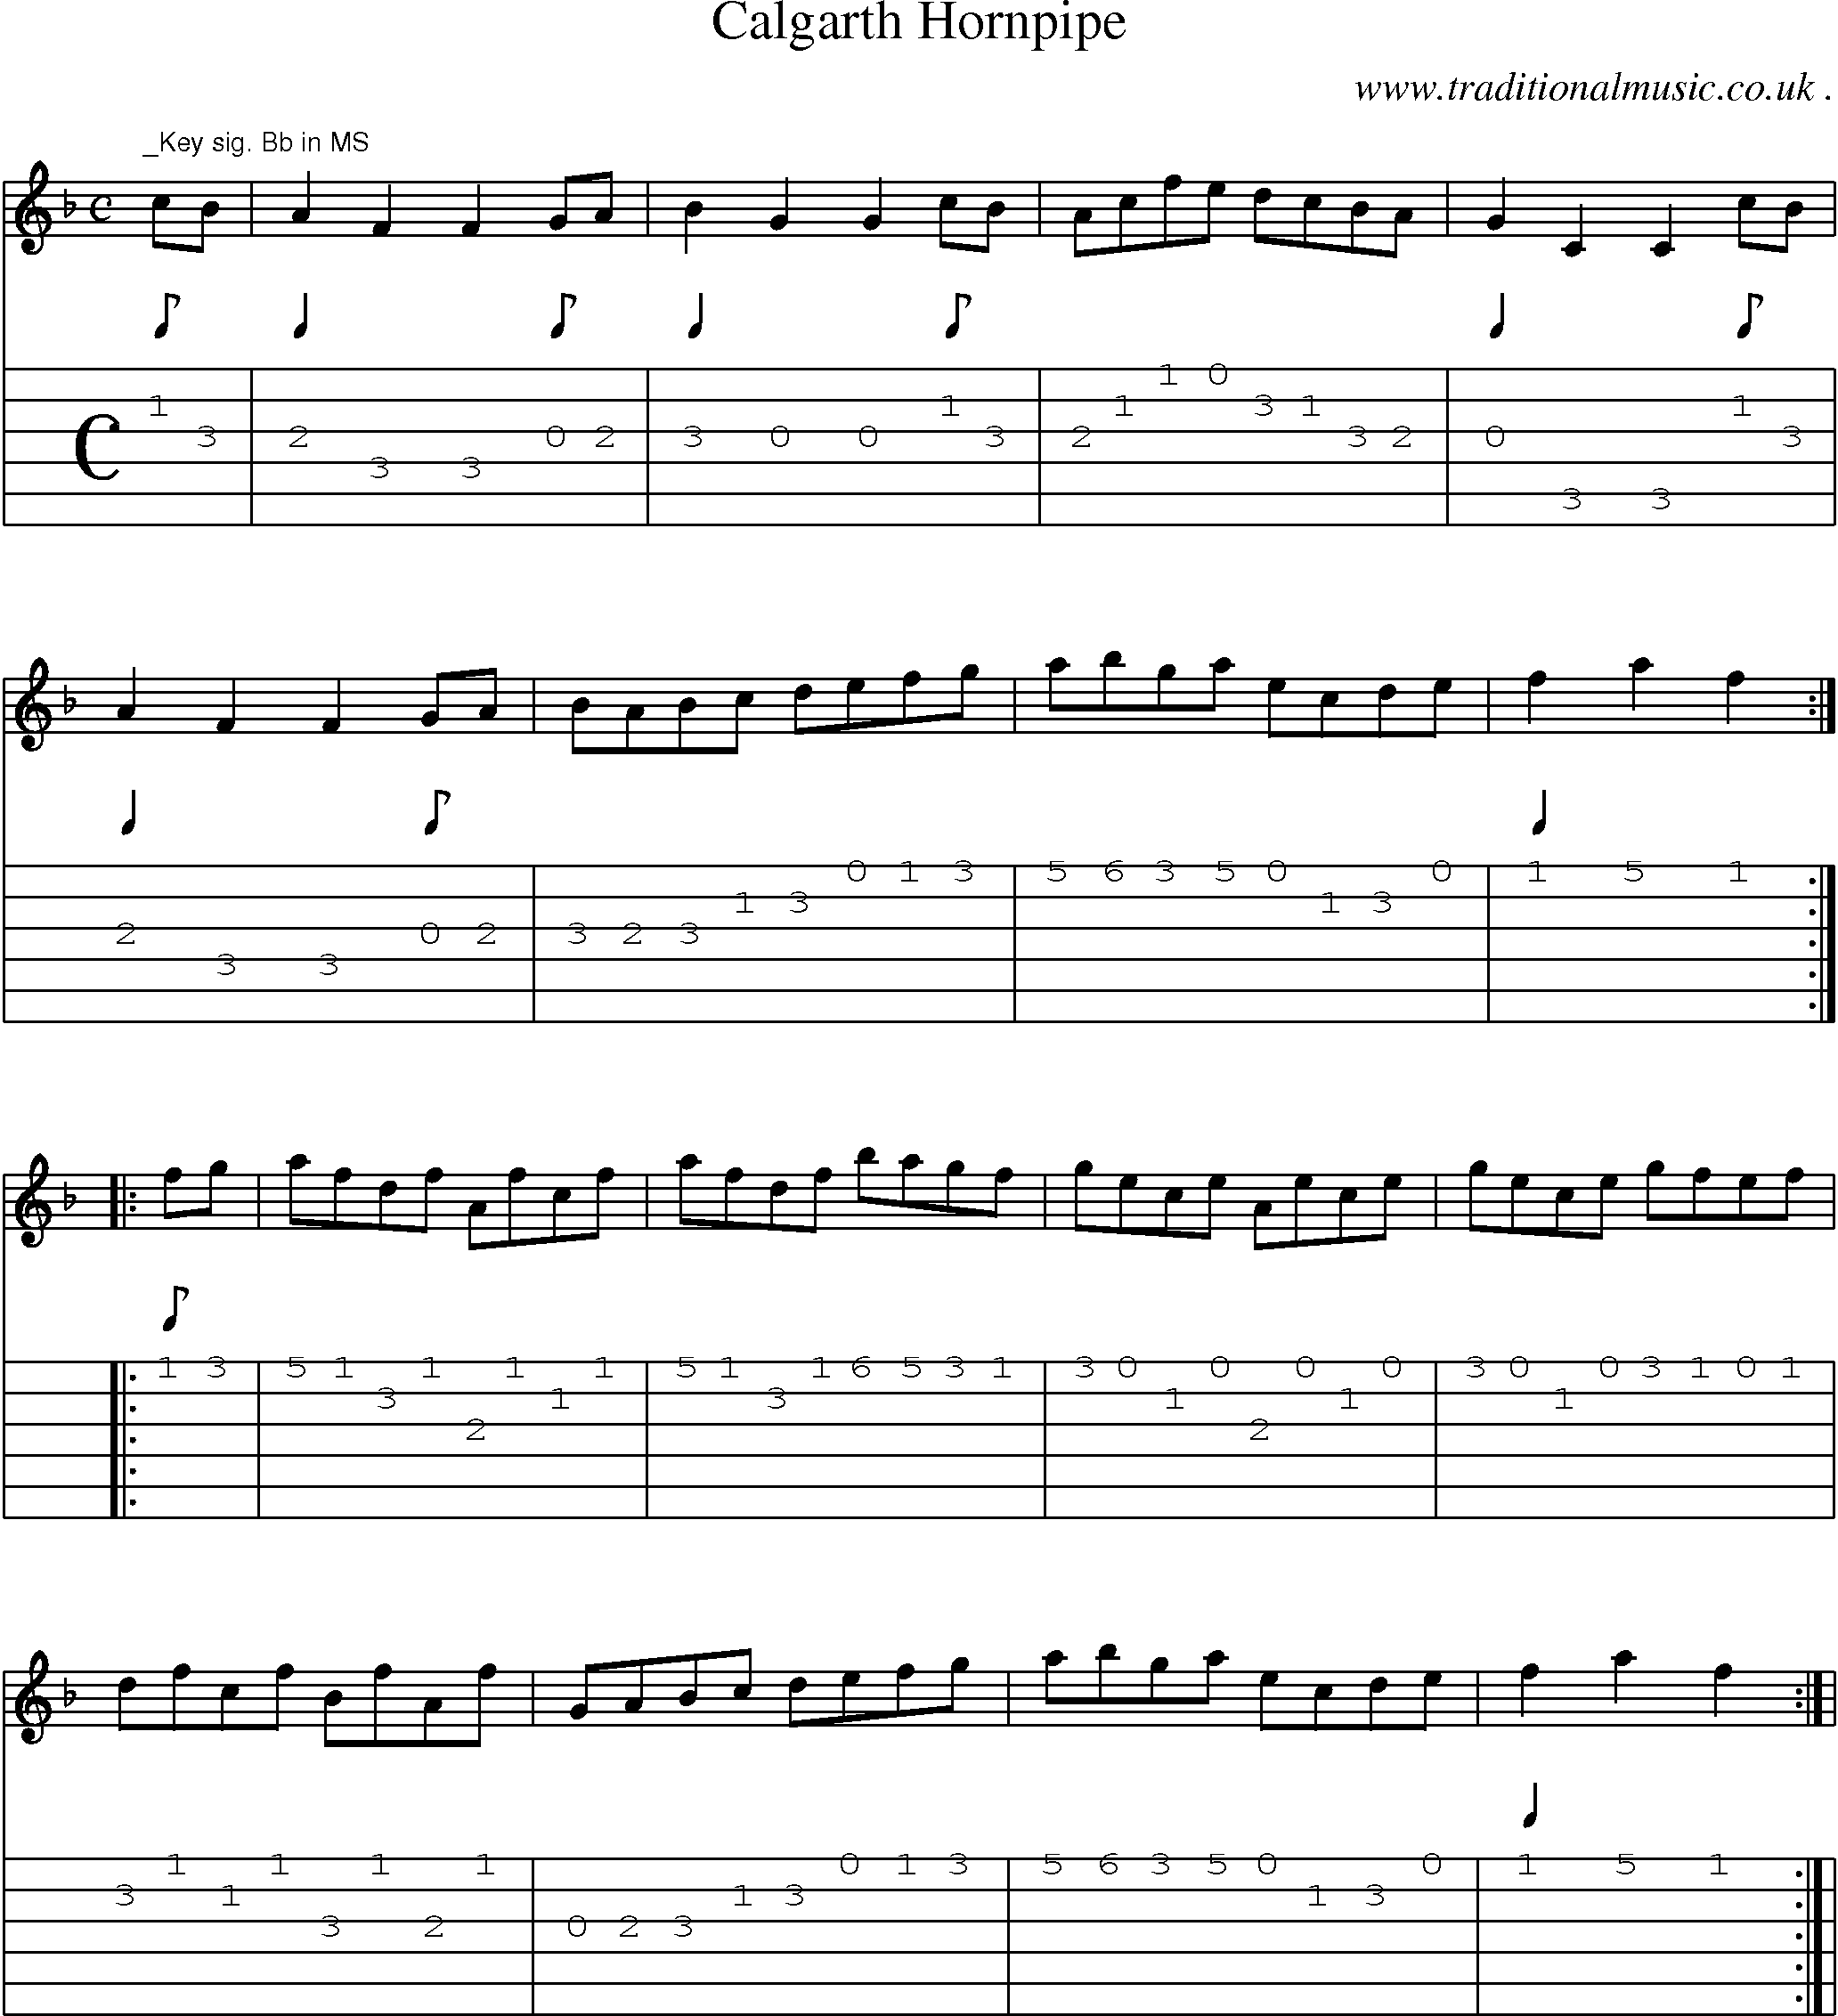 Sheet-Music and Guitar Tabs for Calgarth Hornpipe